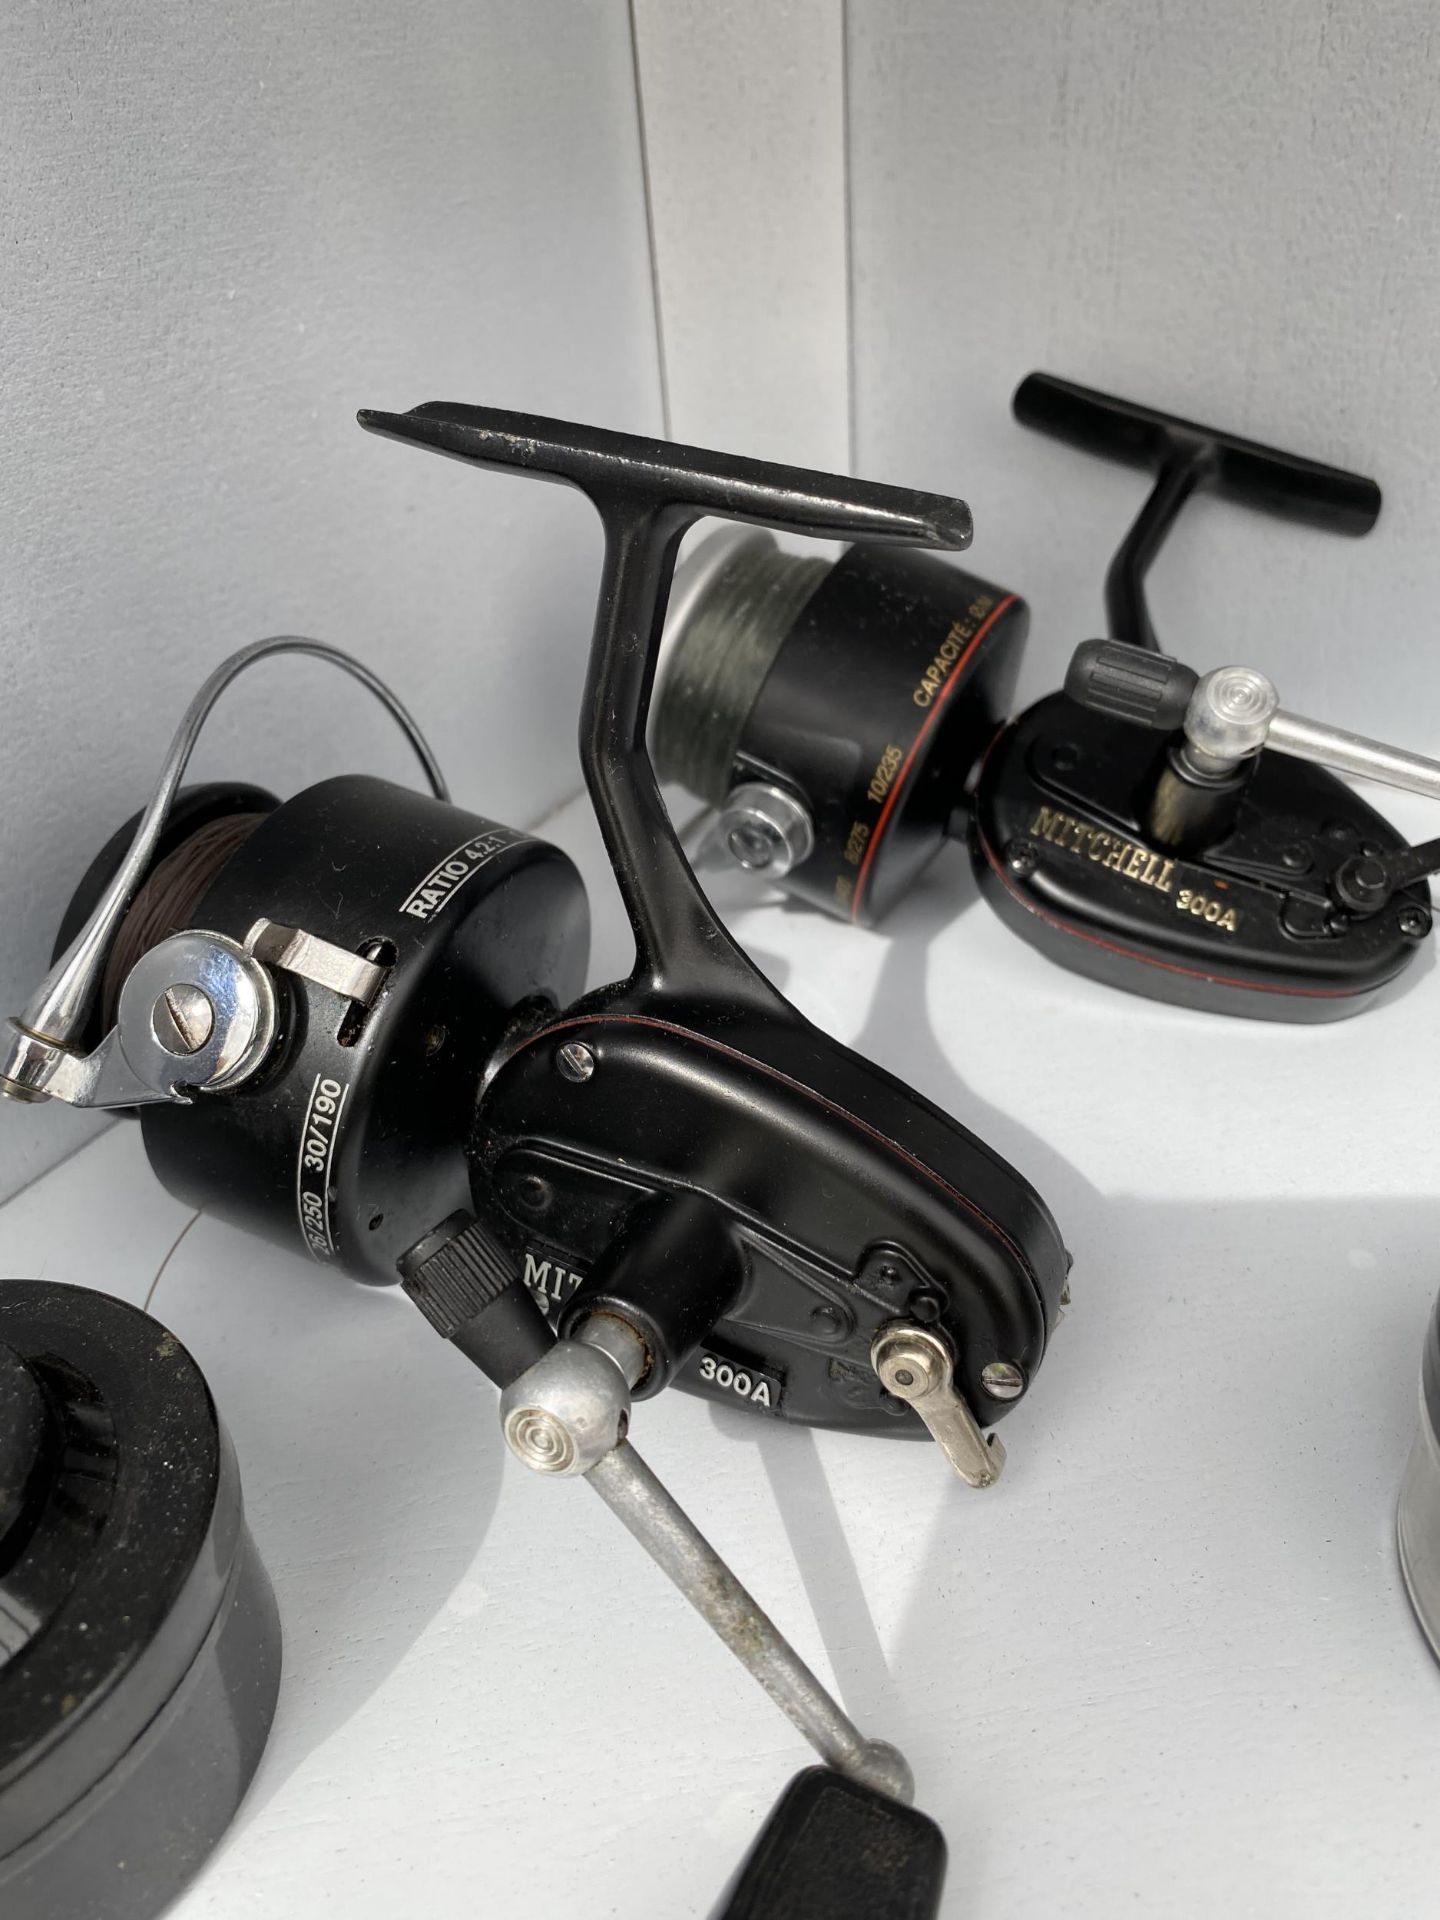 THREE MITCHELL FIXED SPOOL FISHING REELS CONSISTING OF TWO 300A WITH SPARE SPOOLS AND A 308 PRINCE - Image 2 of 4